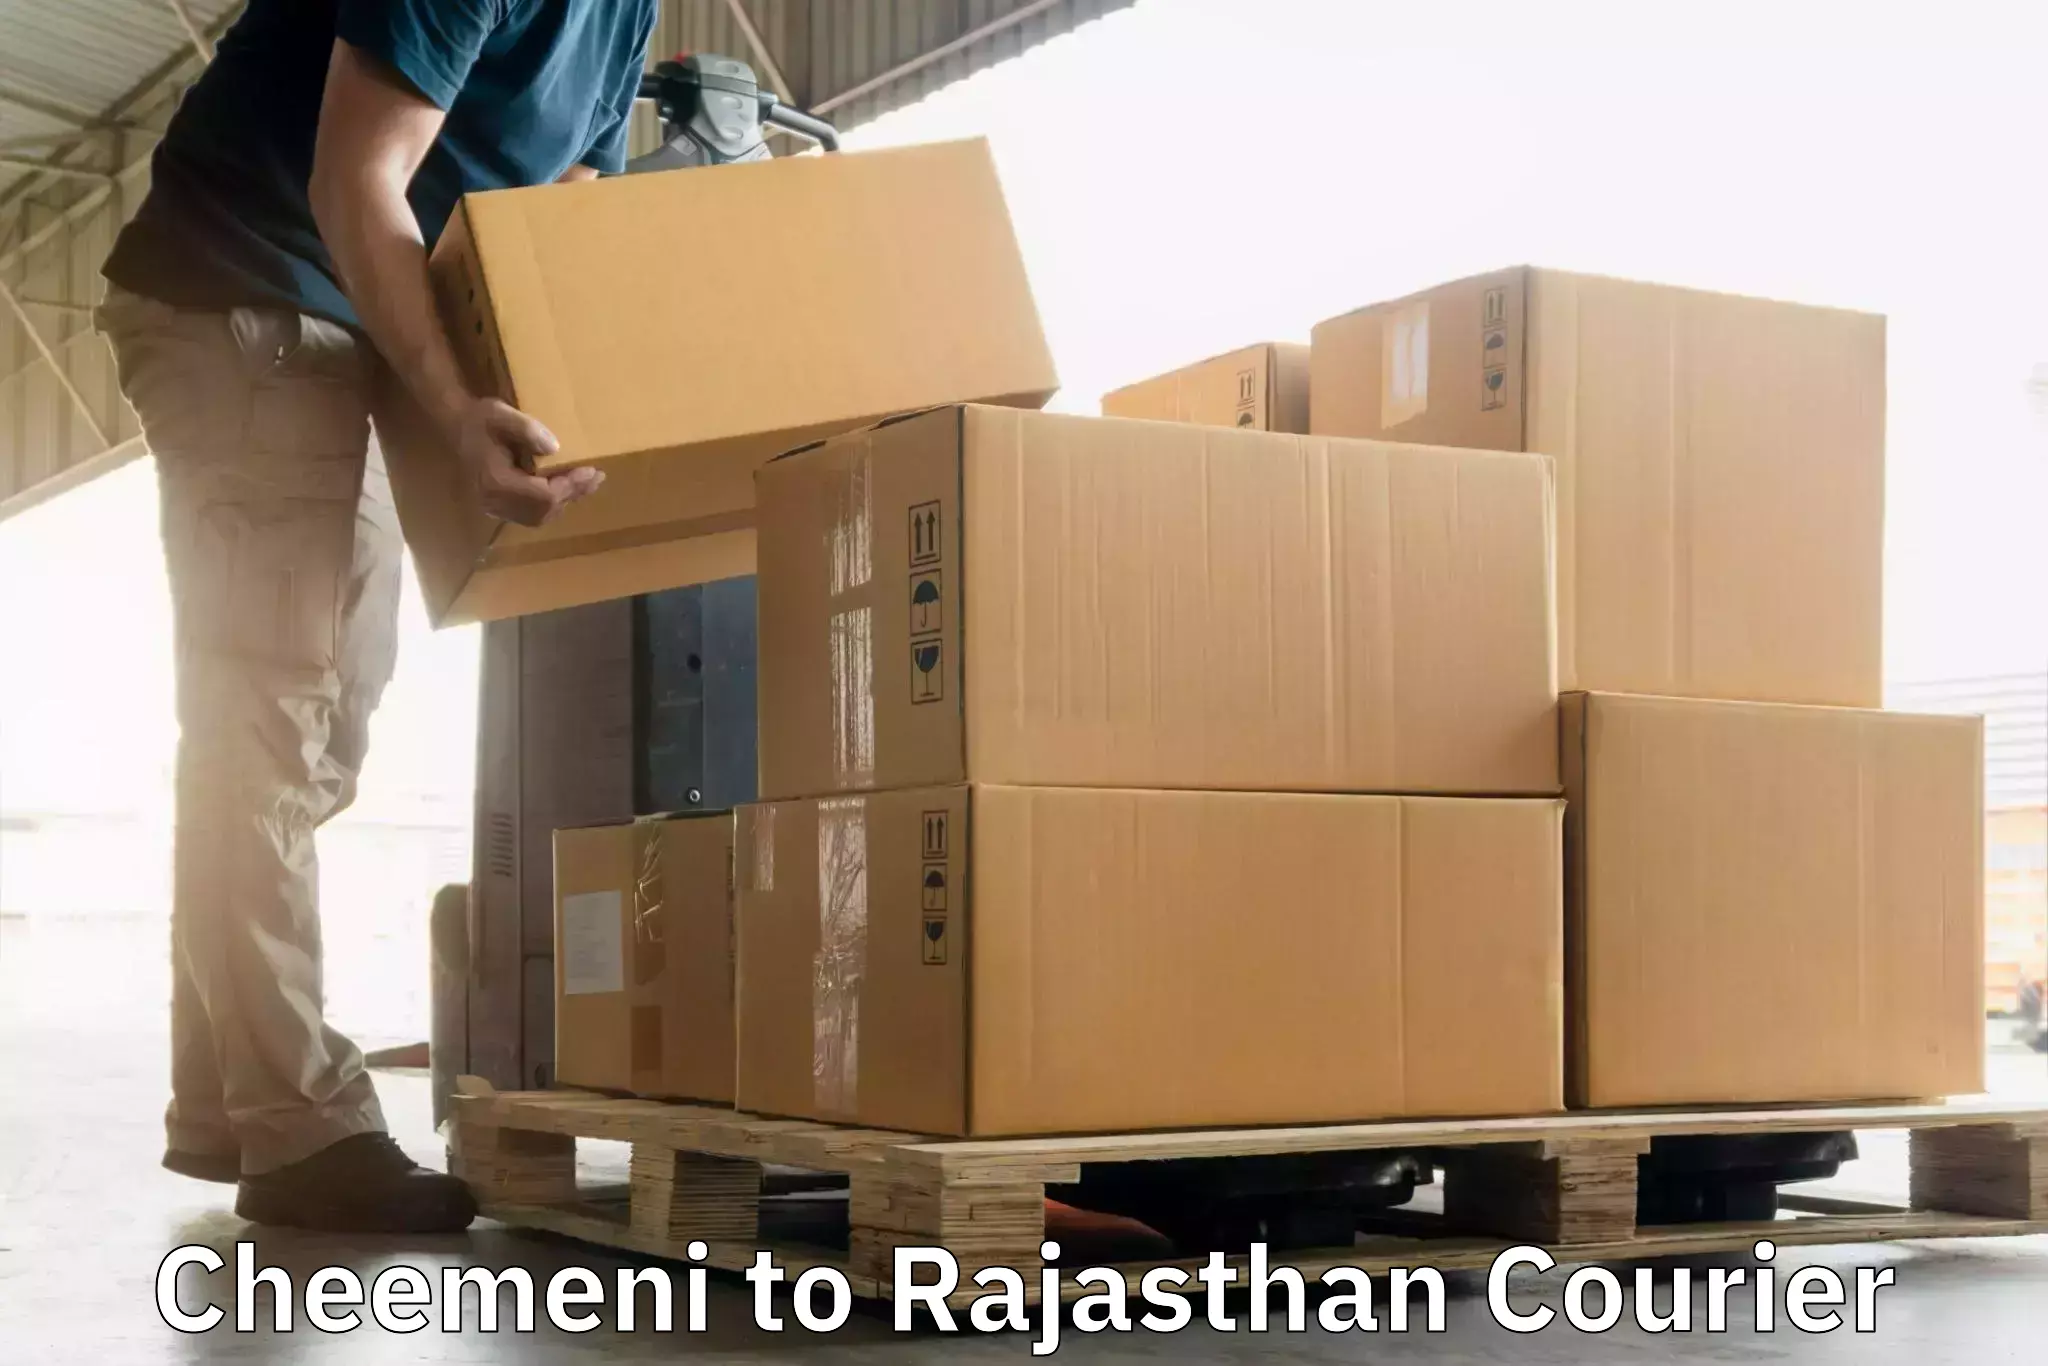 Delivery service partnership Cheemeni to Rajasthan